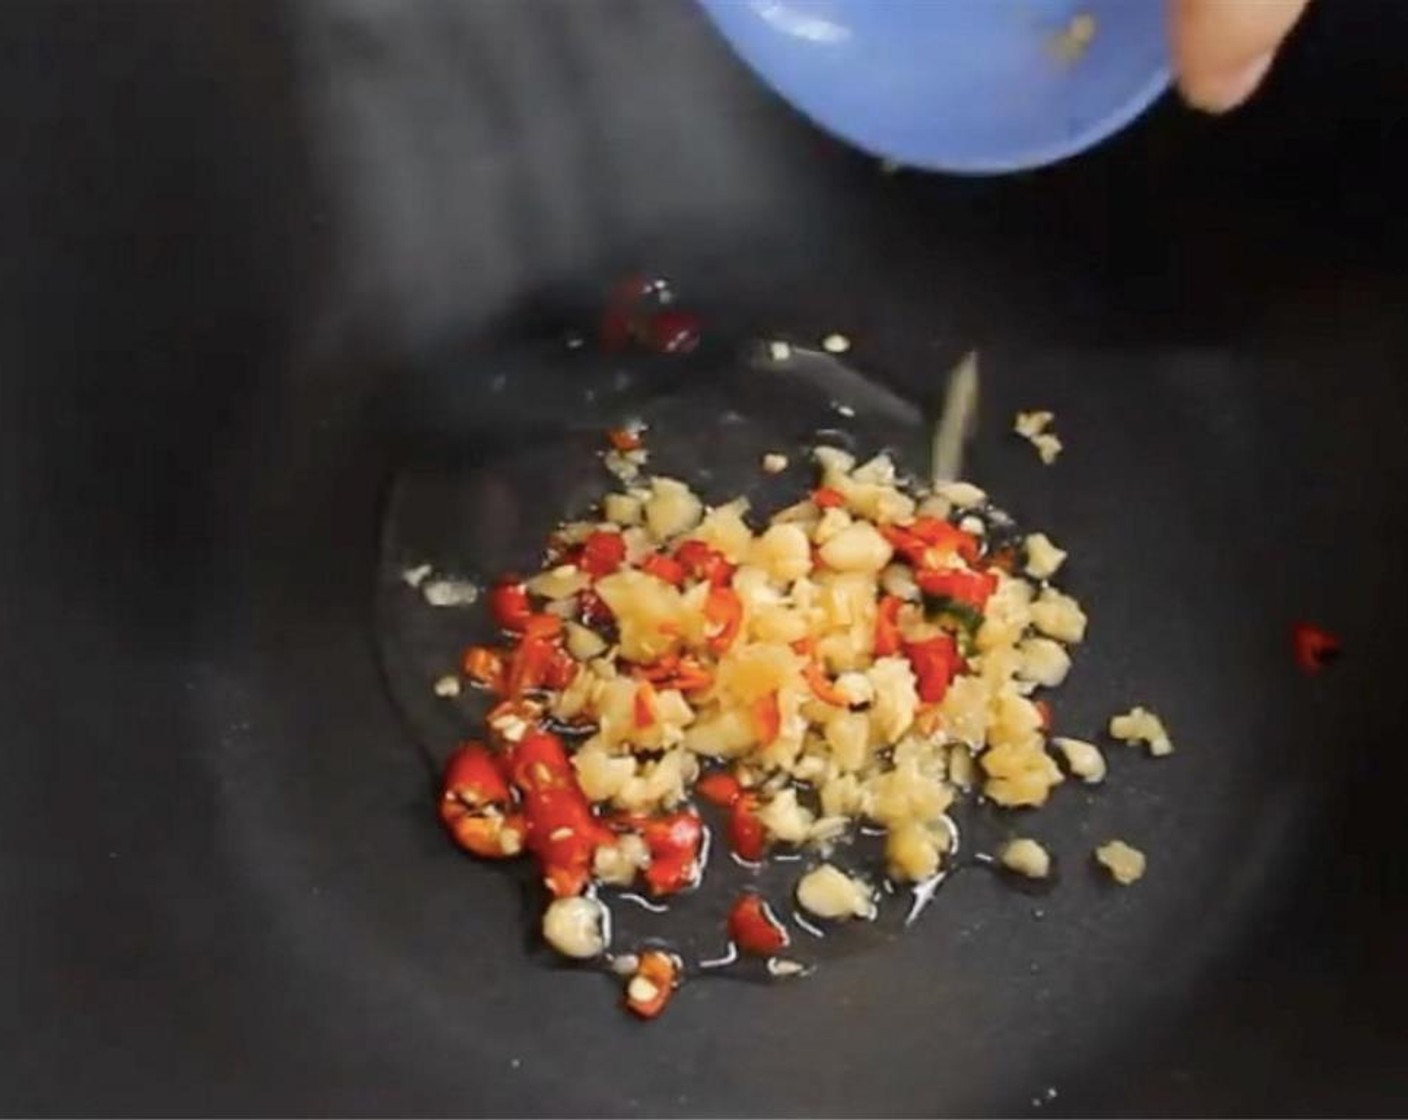 step 6 In a wok, add in oil on medium high heat. Sauté Garlic (2 cloves) and chili padi together until golden brown.